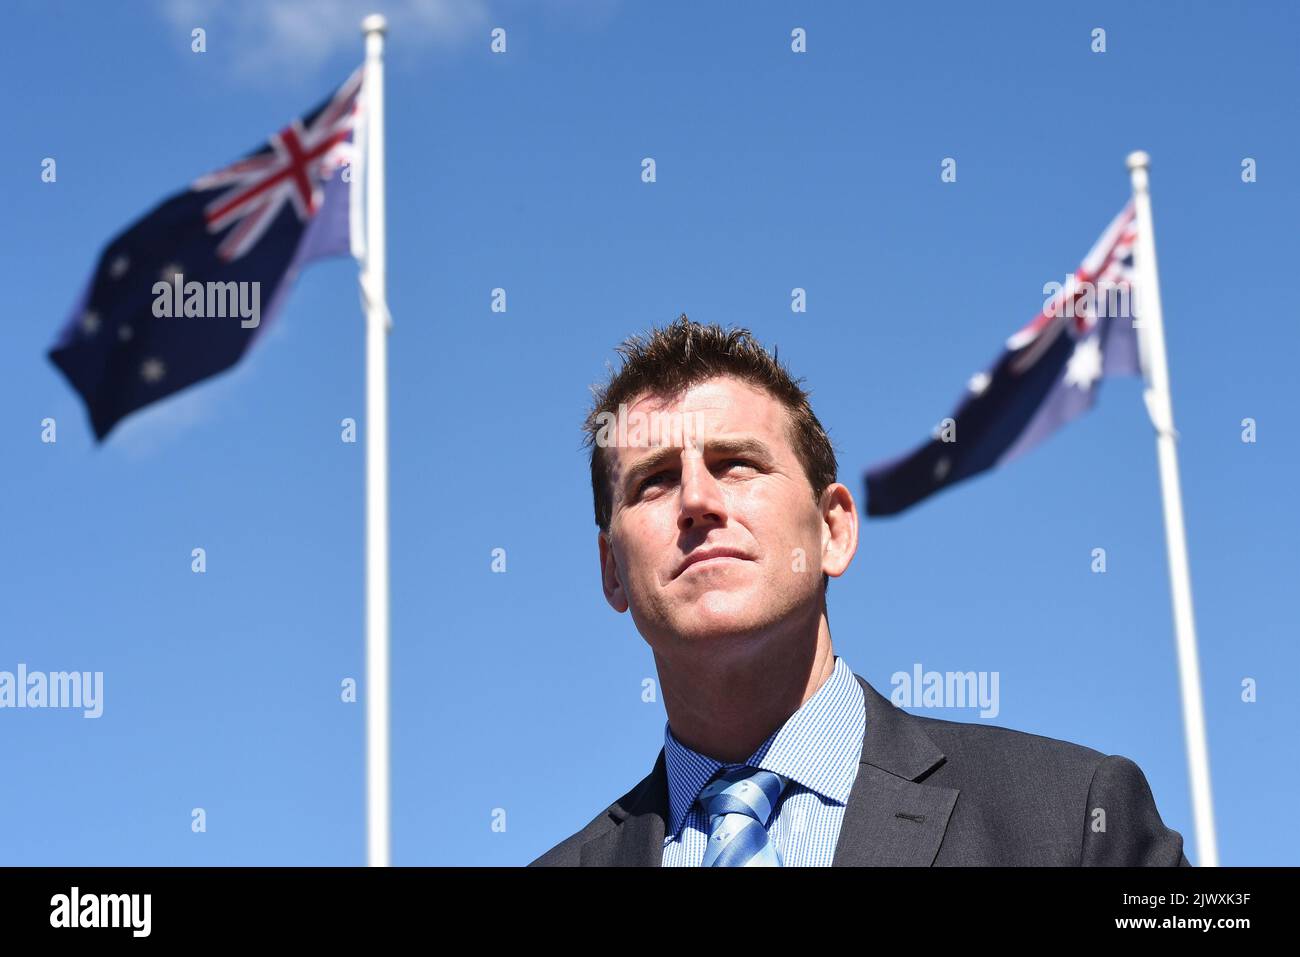 Victoria Cross recipient Ben Roberts-Smith attends the arrival of the Wandering Warriors at the Australian War Memorial in Canberra on Thursday, Oct. 16, 2014. The Australian War Memorial marked the finish of the Wandering Warriors' 1300km trek from Brisbane to Canberra. (AAP Image/Lukas Coch) Stock Photo